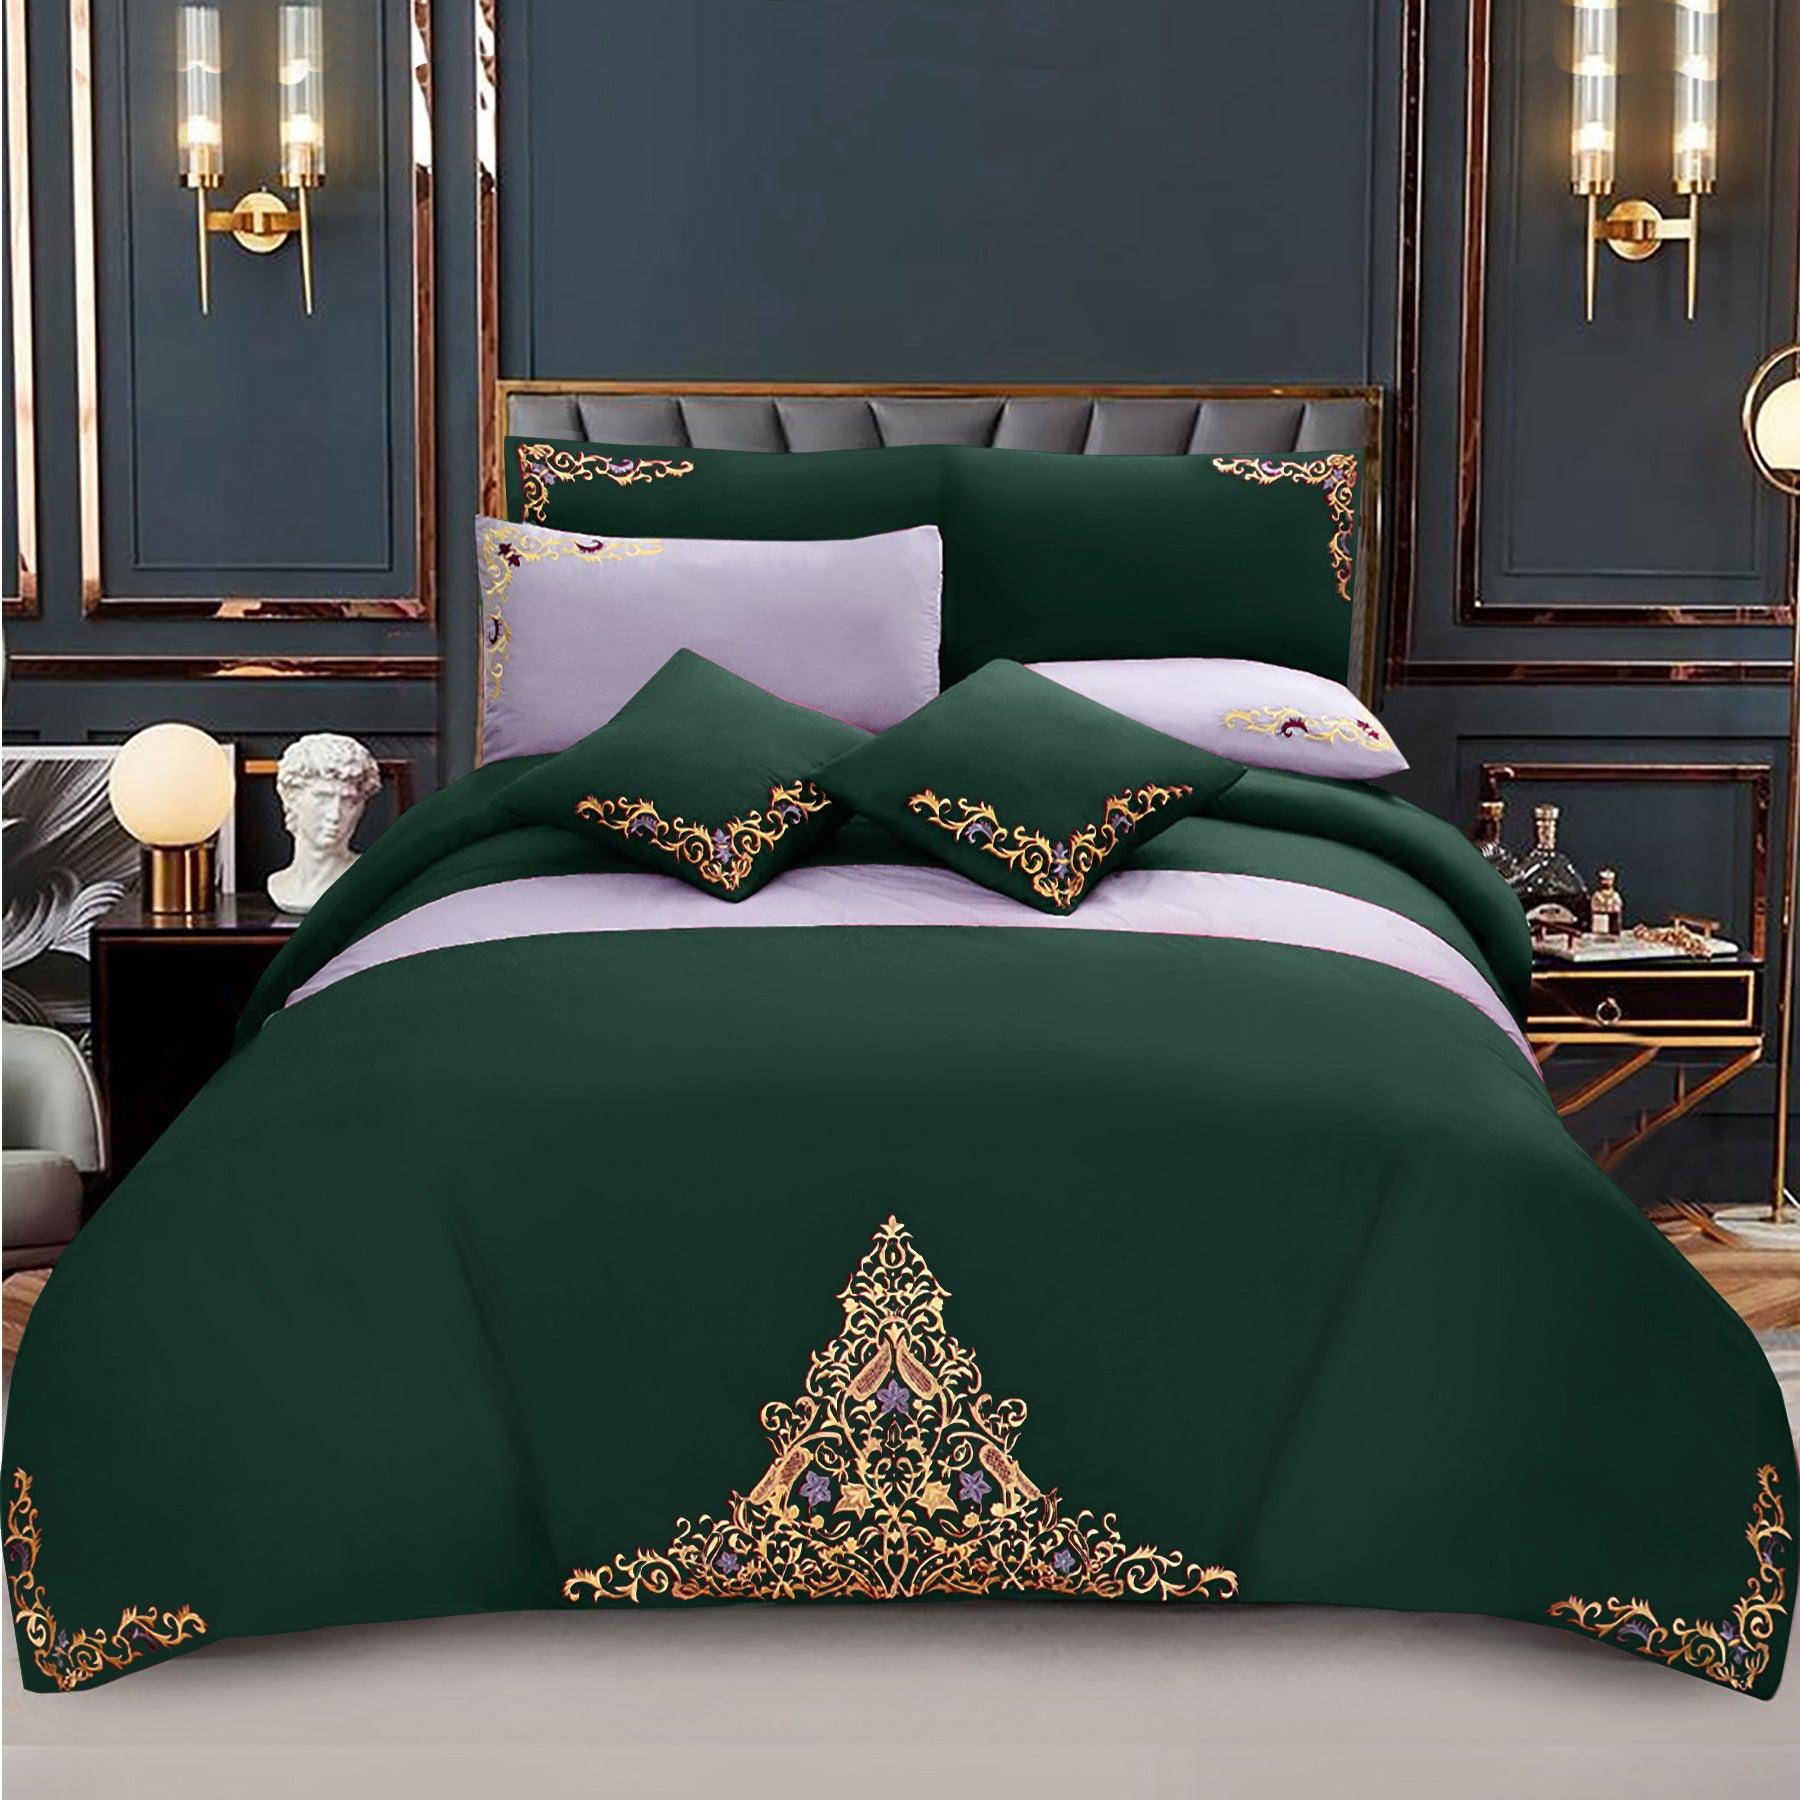 Mariana Centered Embroidered Motif Duvet Cover Set Green - 92Bedding